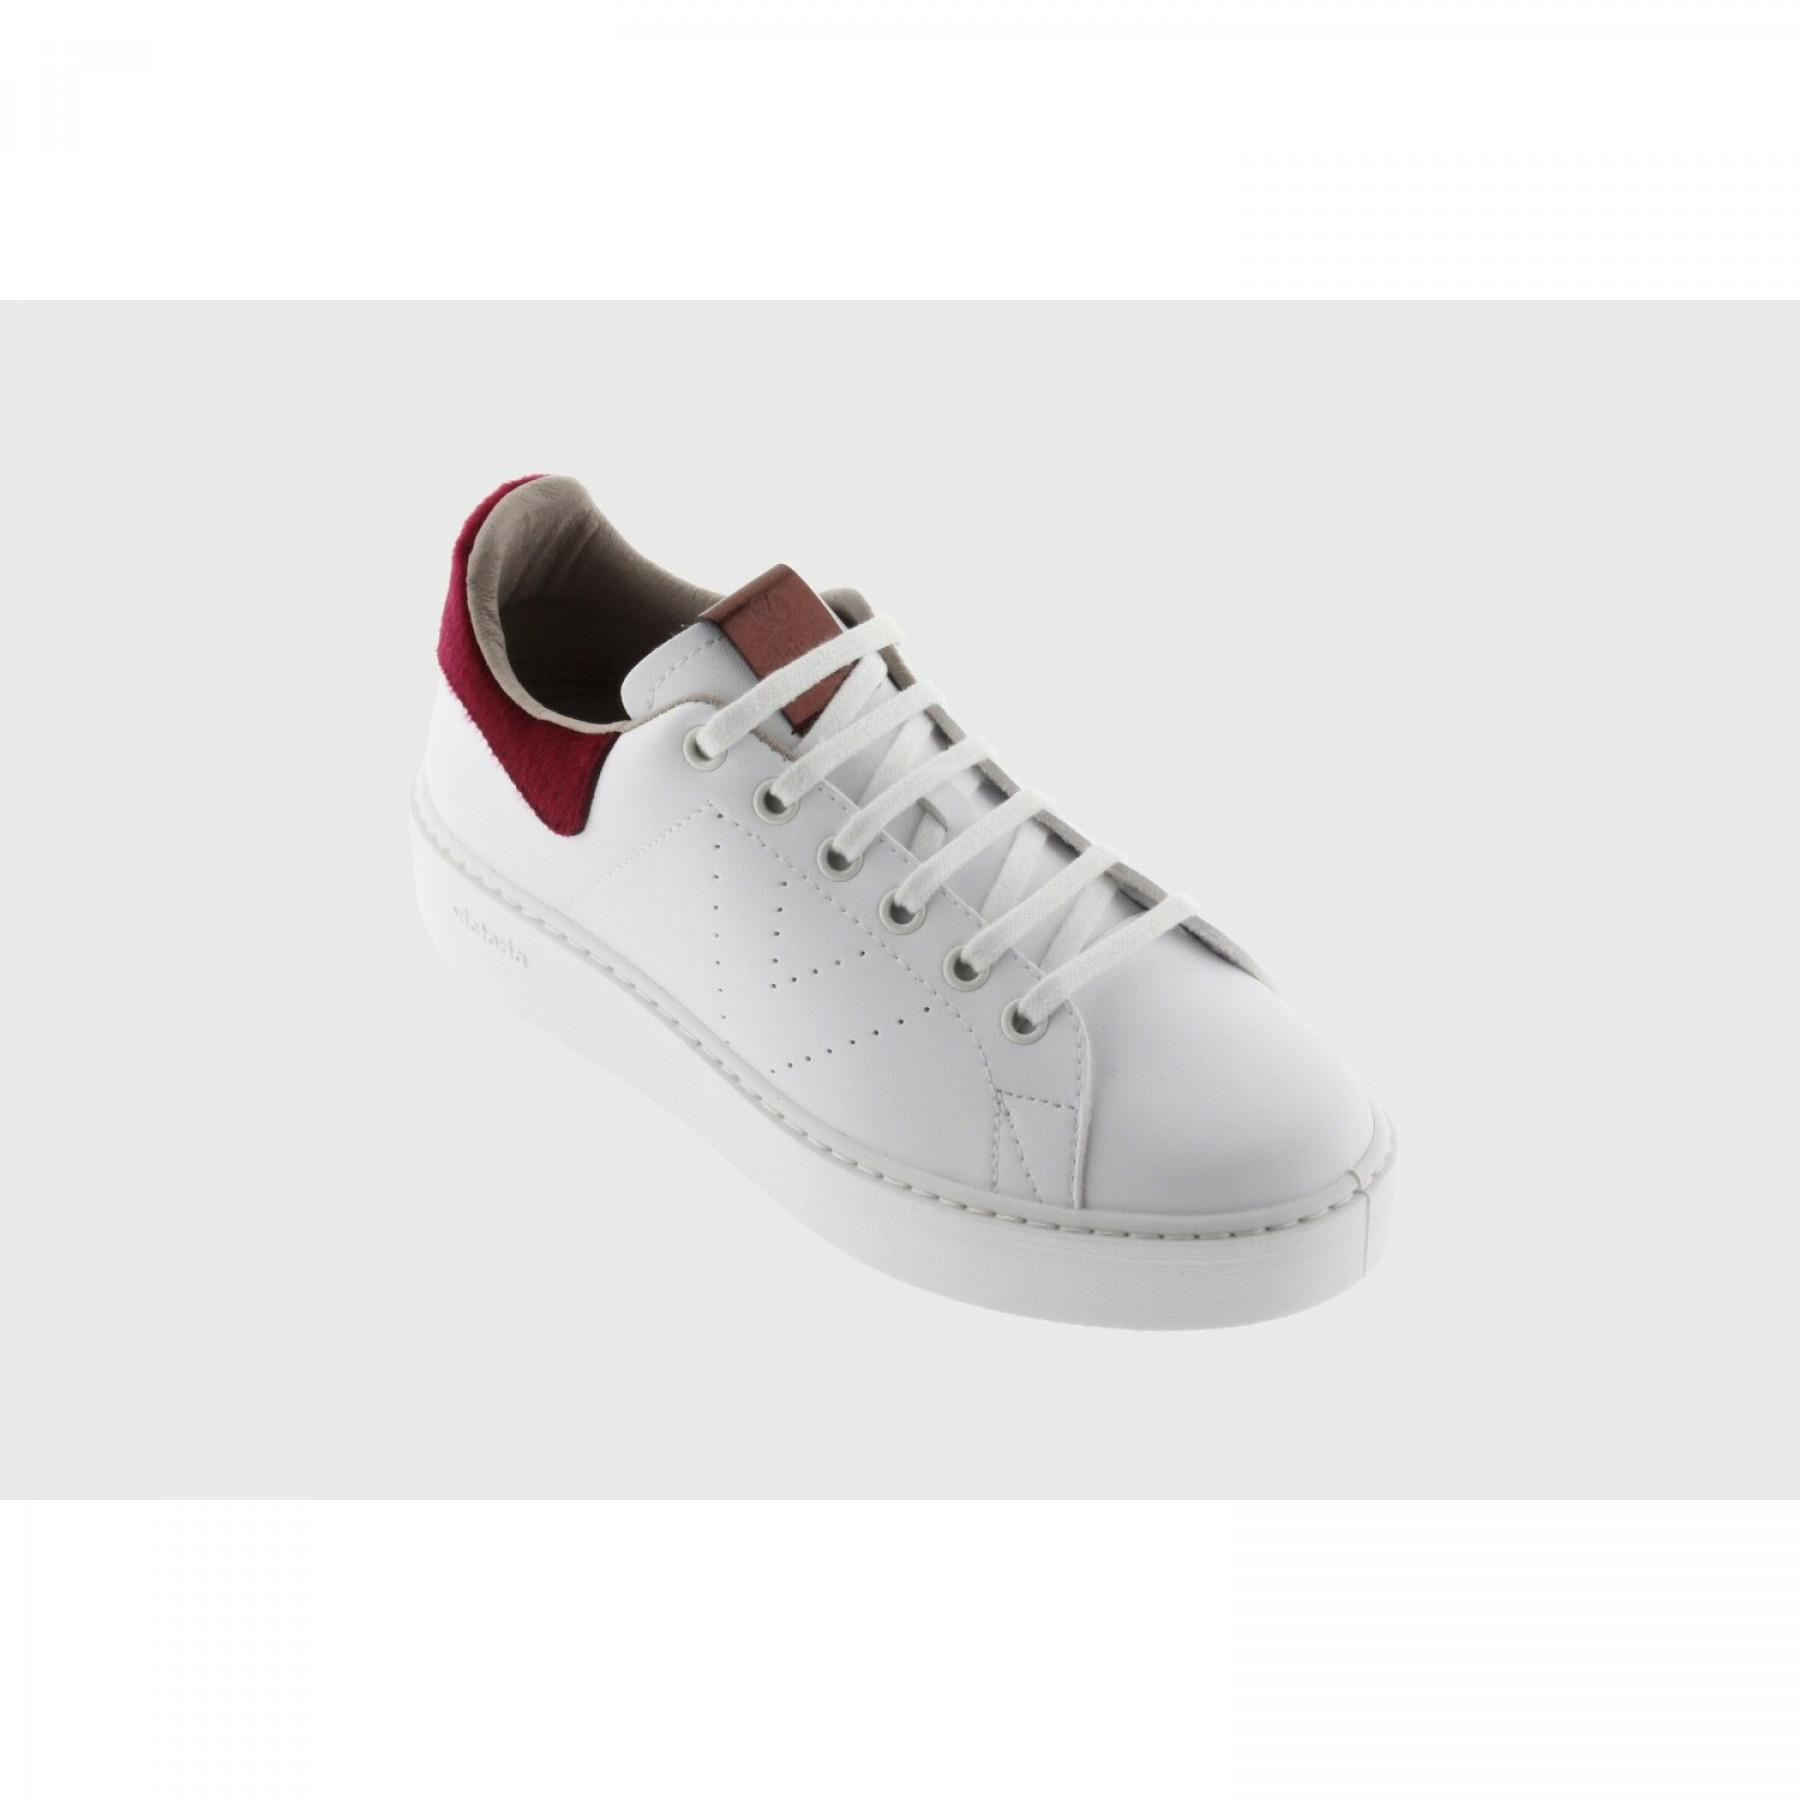 Sneakers woman Victoria 1260137